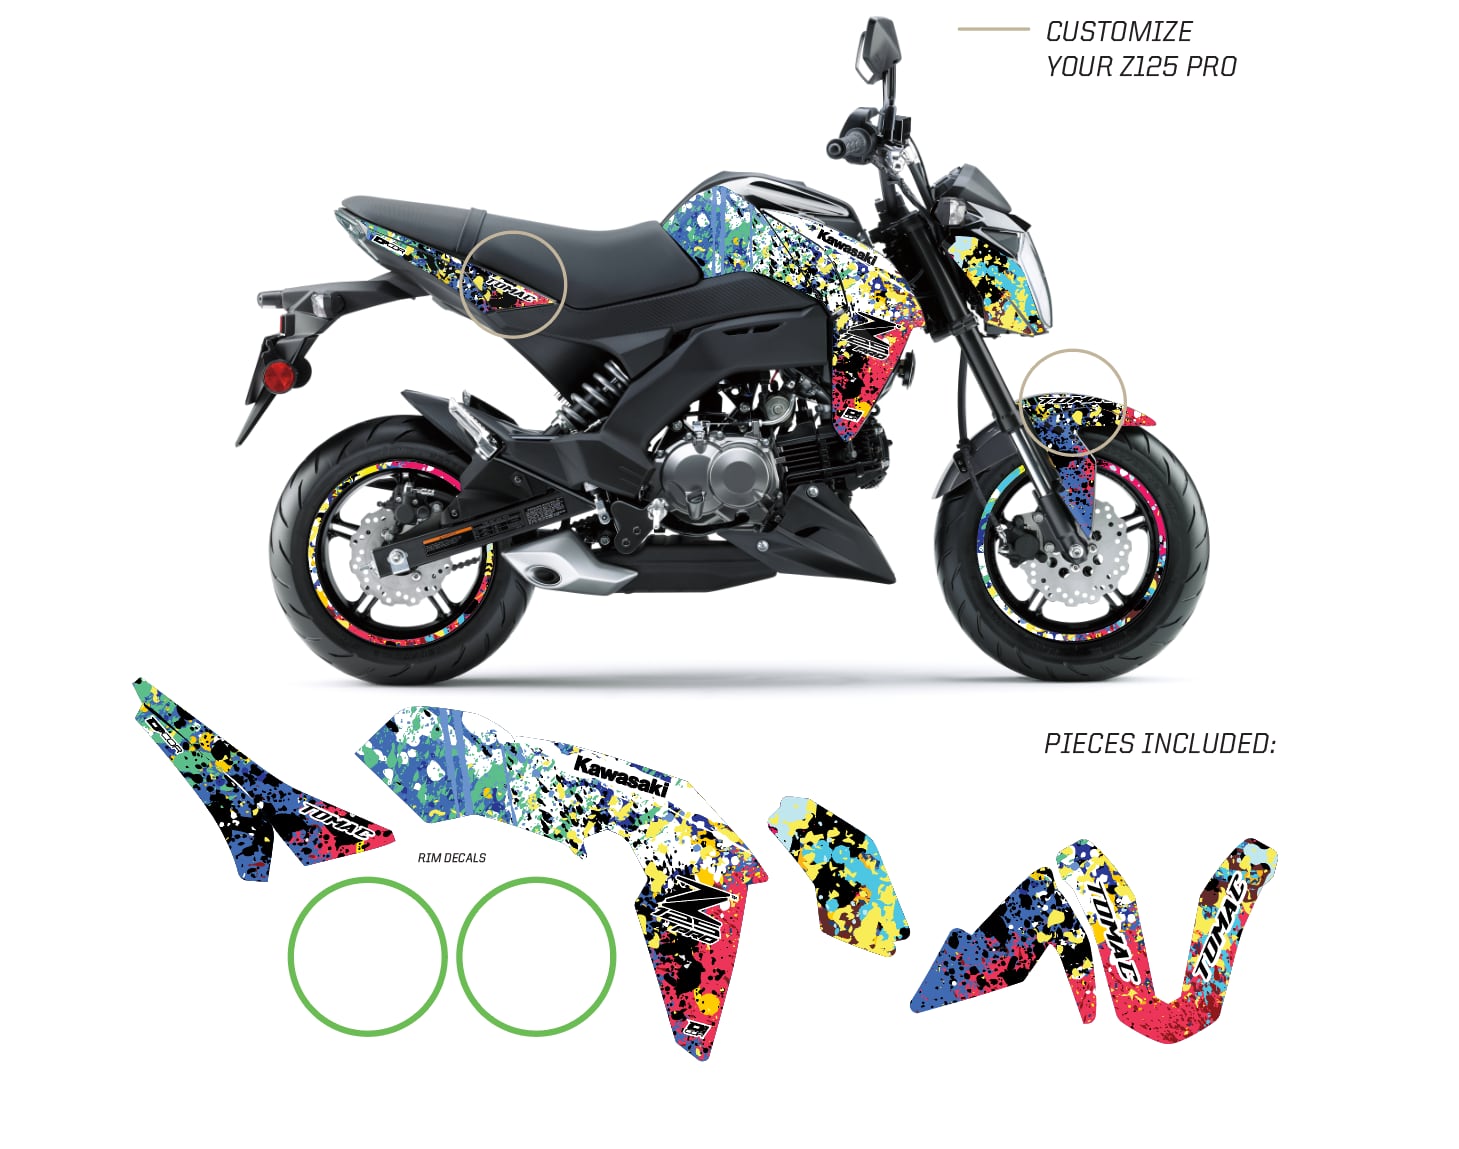 Along with home delivery and other incentives, Kawasaki is also offering a free custom graphics kit with the purchase of a new Z125 Pro model.